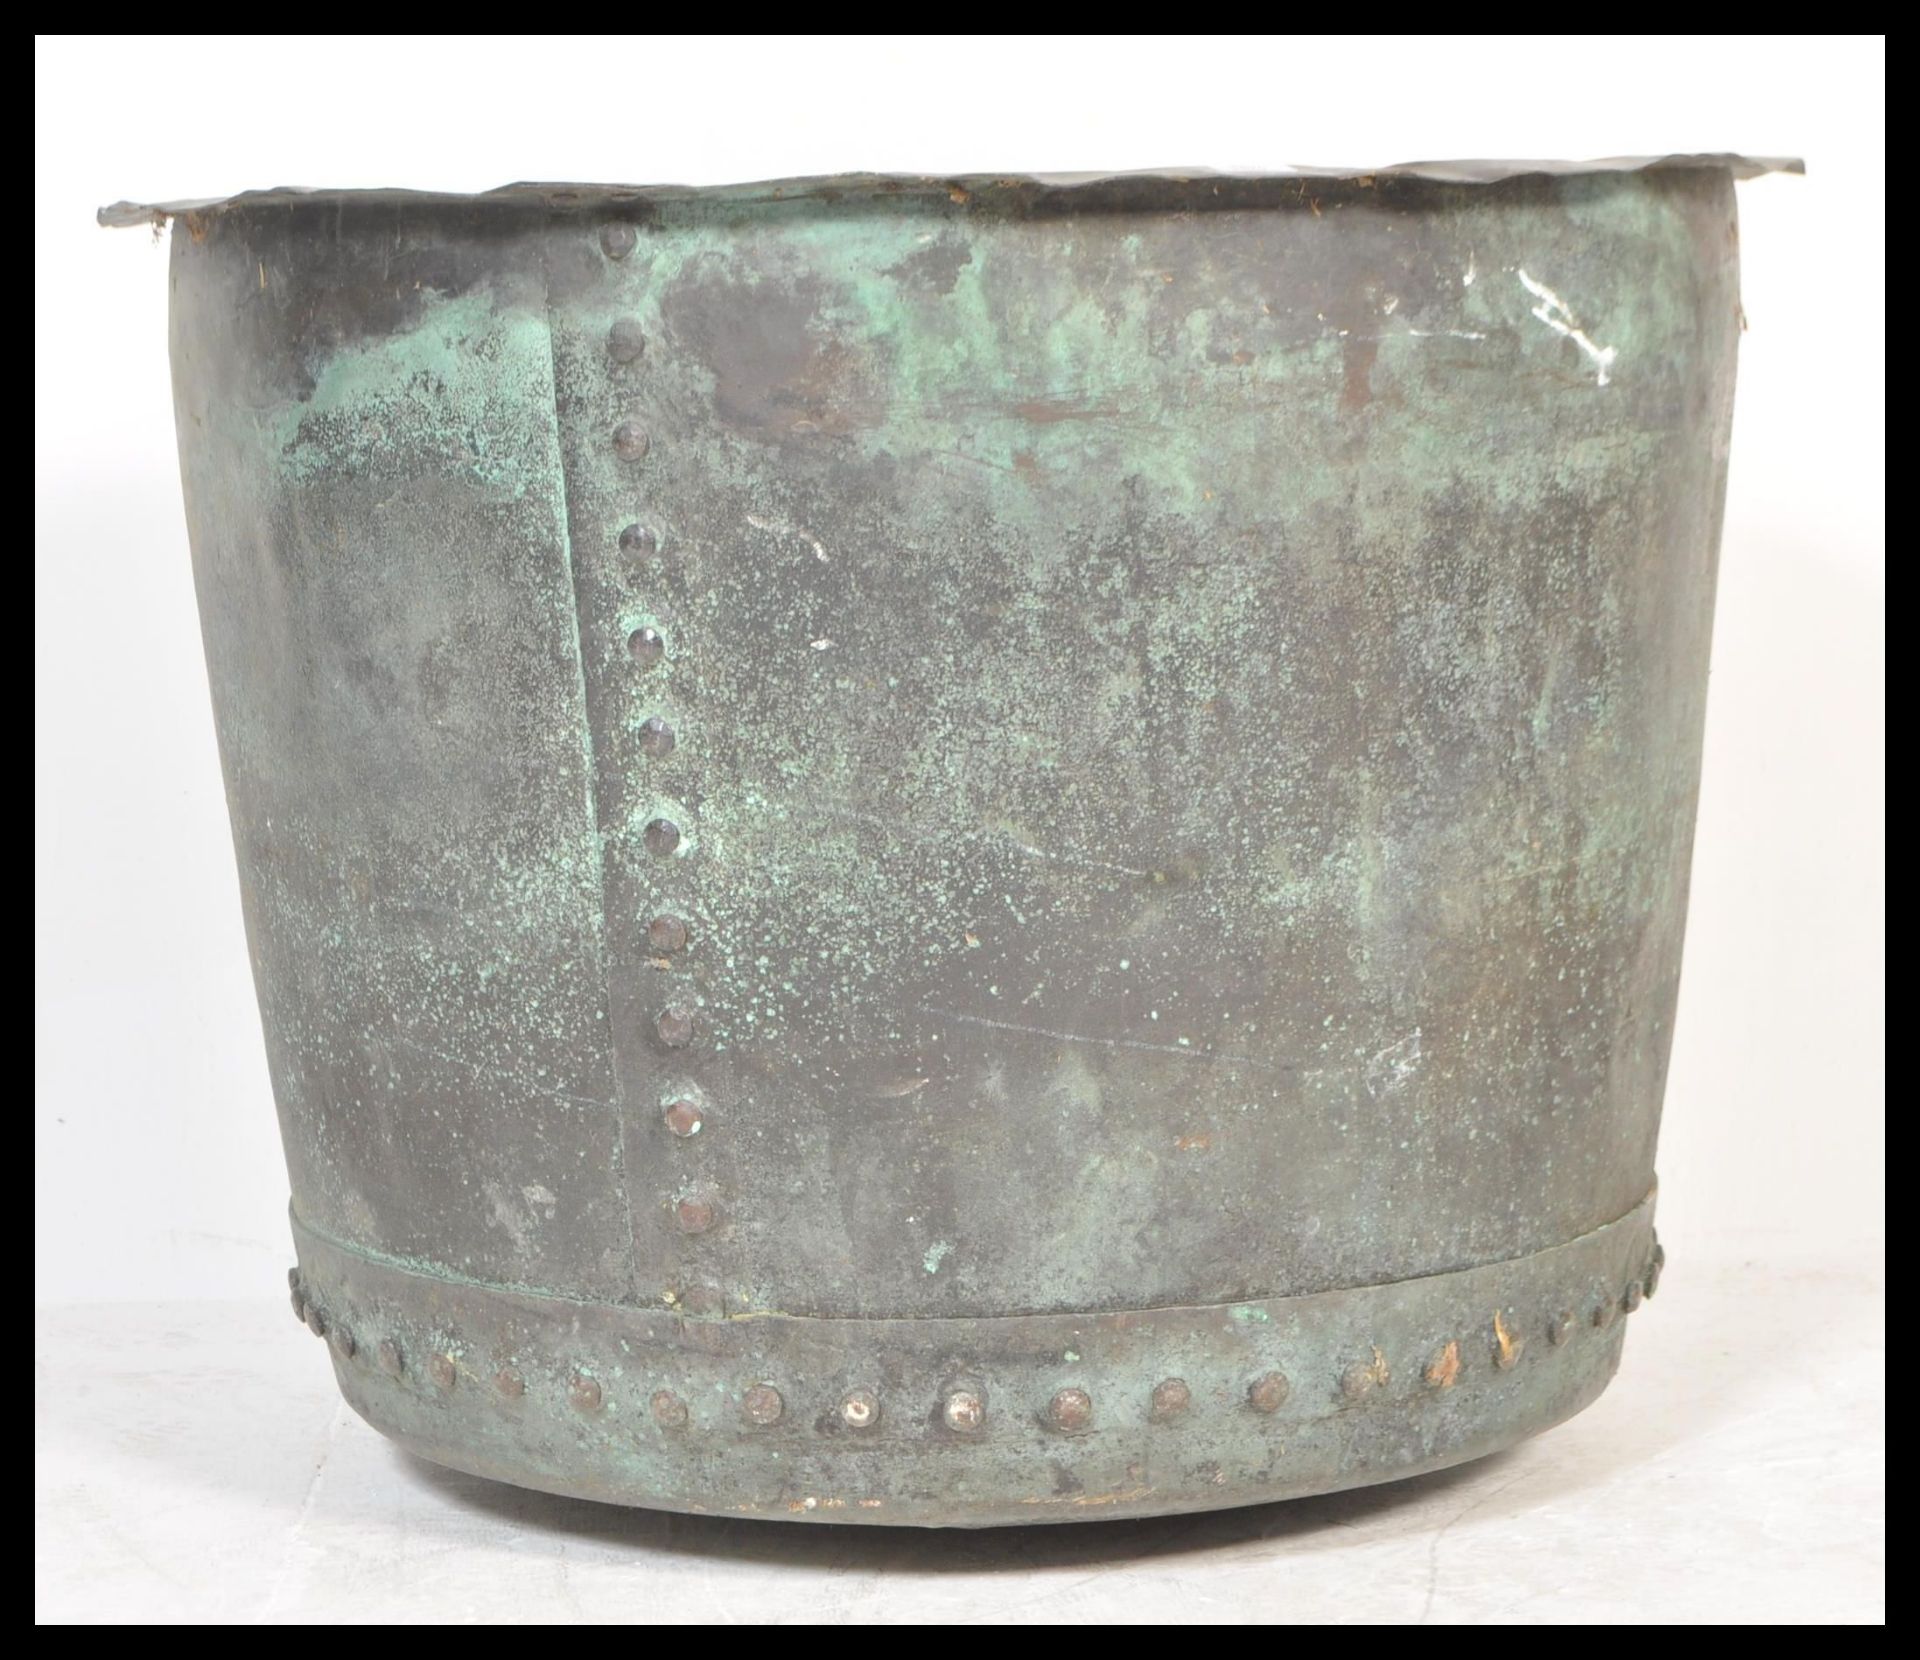 A good, very large 19th century Victorian Industrial copper wash bin copper / planter of